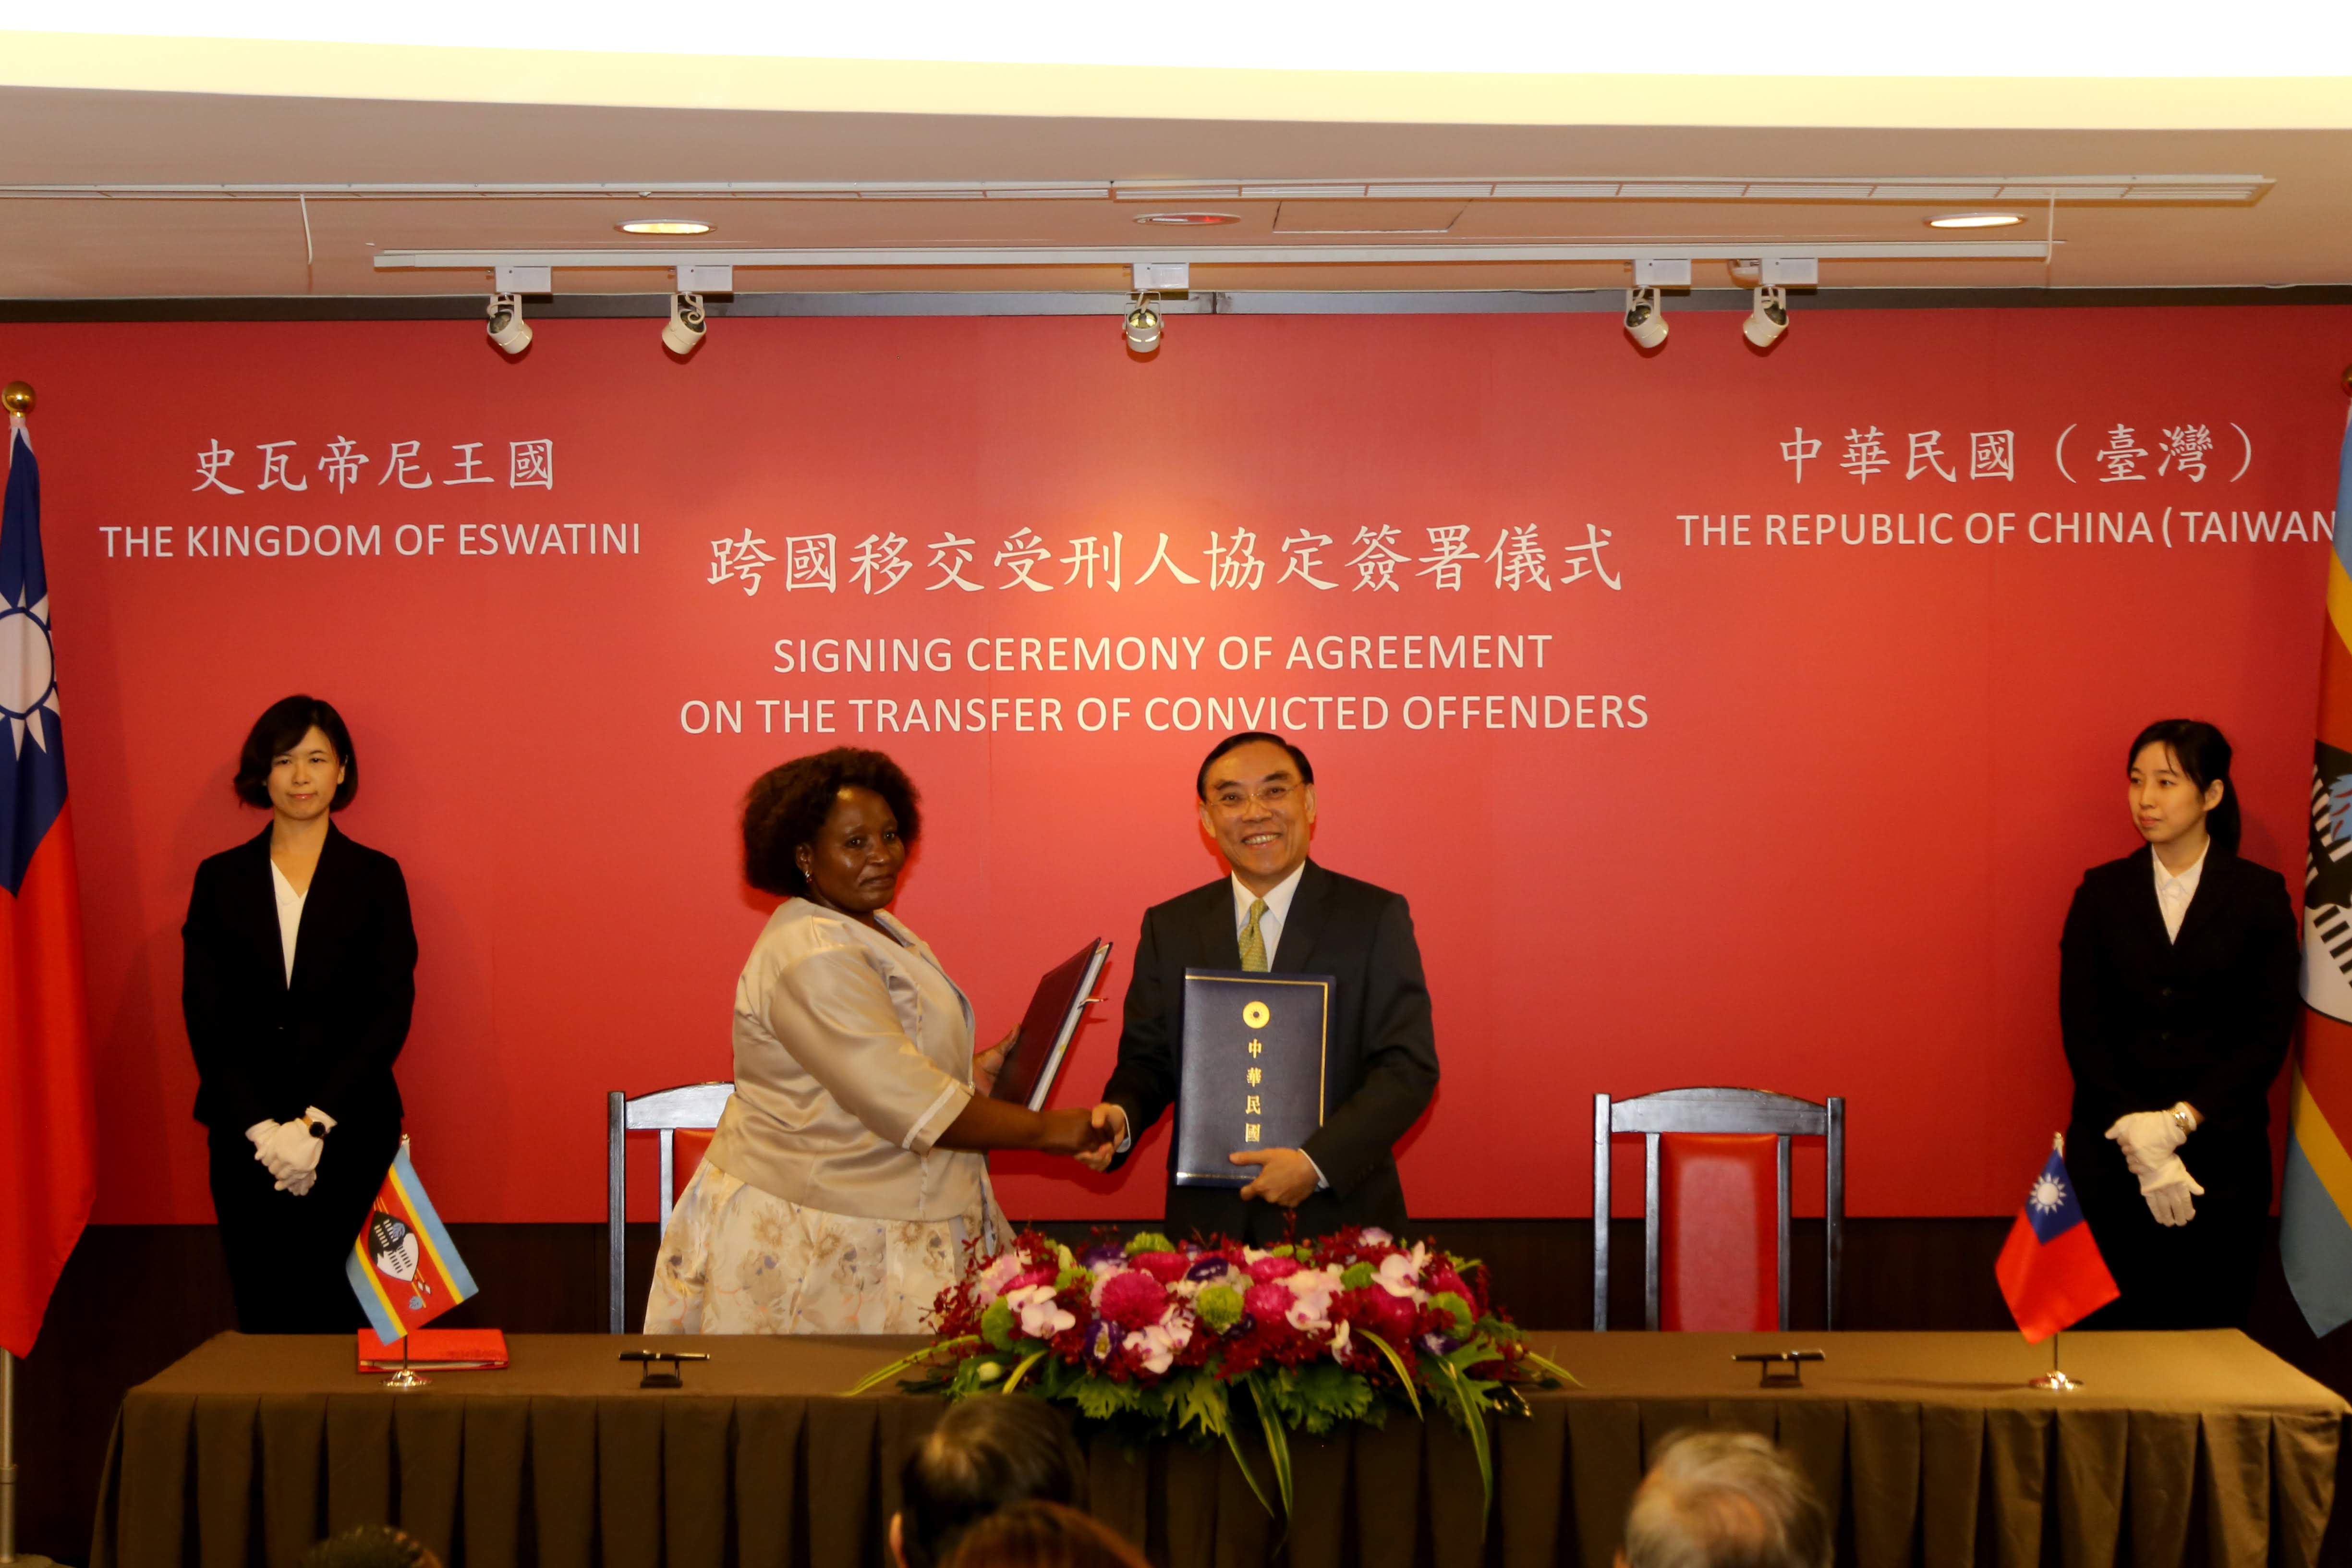 Signing Ceremony of Agreement on the Transfer of Convicted Offenders between the Kingdom of Eswatini and the Republic of China(Taiwan) on Feb. 27, 2019